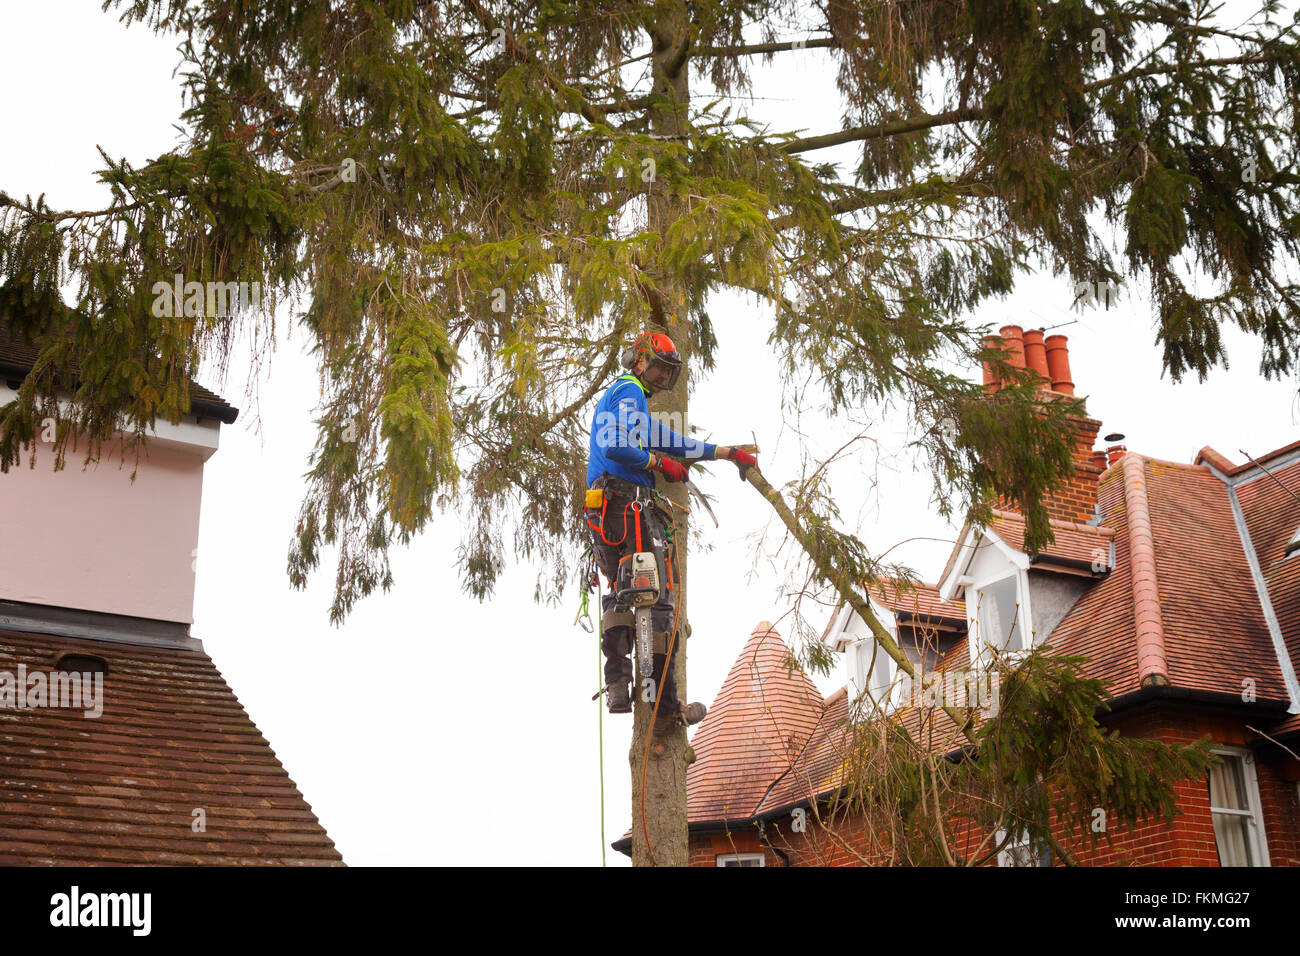 Tree felling UK; A tree surgeon in the process of cutting down a fir tree, UK Stock Photo